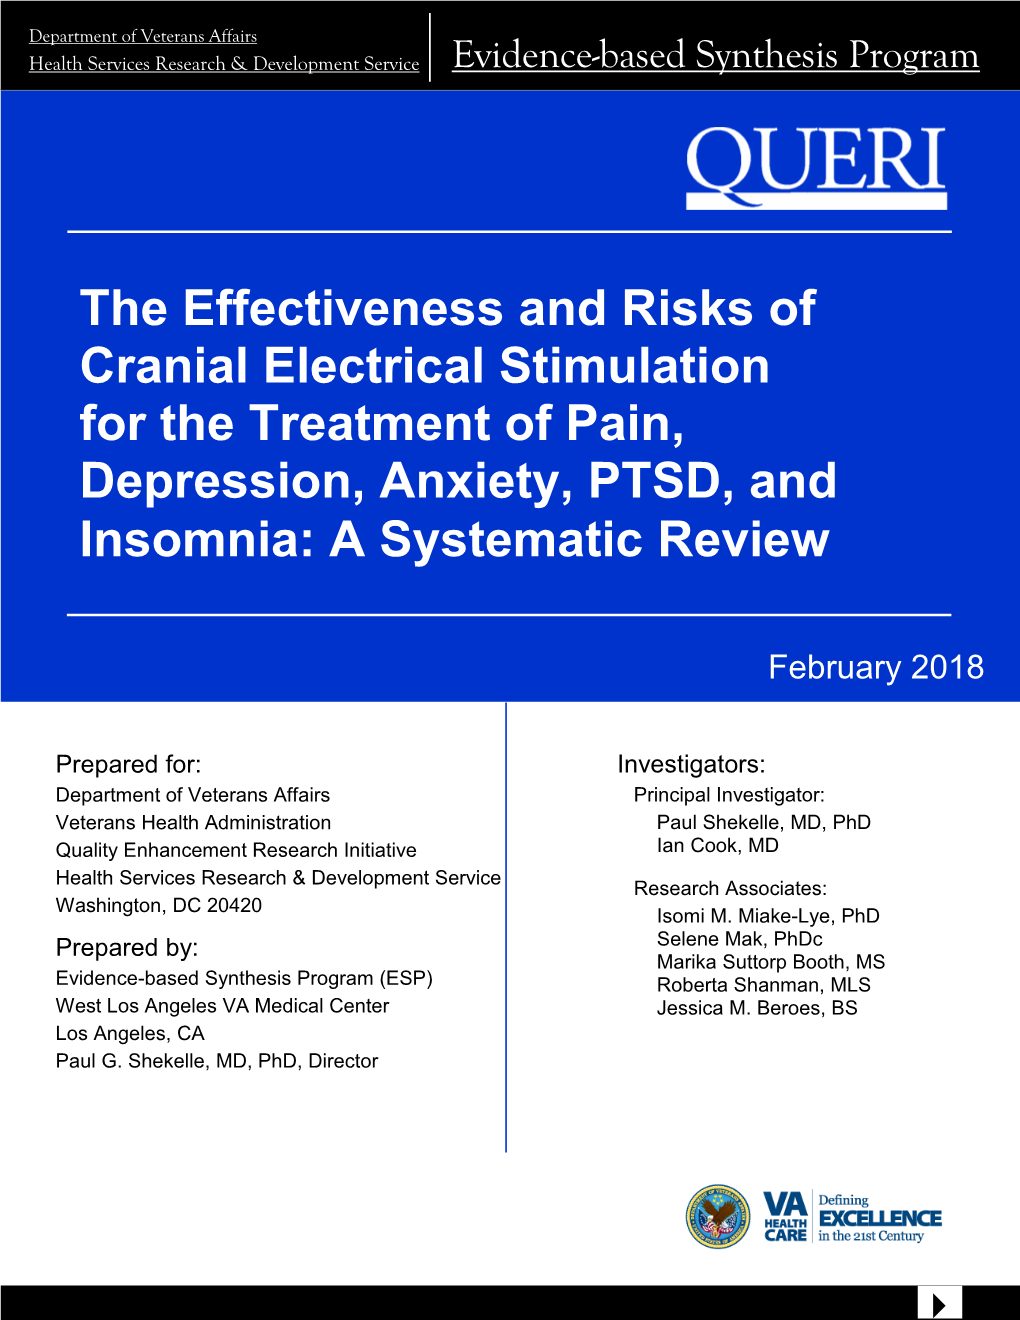 The Effectiveness and Risks of Cranial Electrical Stimulation for the Treatment of Pain, Depression, Anxiety, PTSD, and Insomnia: a Systematic Review